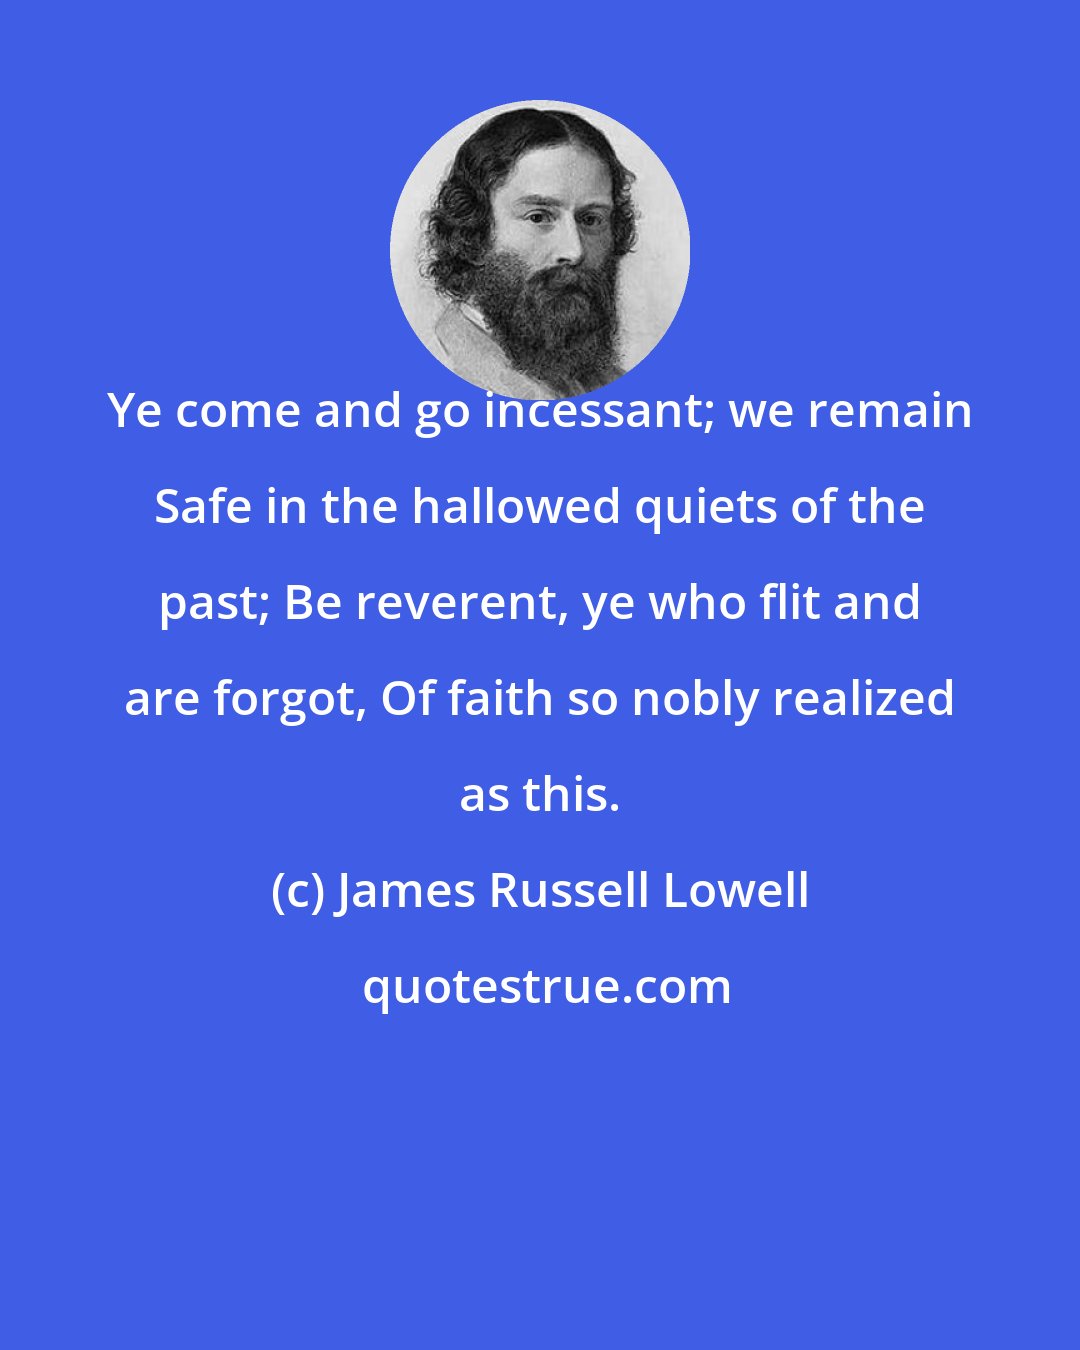 James Russell Lowell: Ye come and go incessant; we remain Safe in the hallowed quiets of the past; Be reverent, ye who flit and are forgot, Of faith so nobly realized as this.